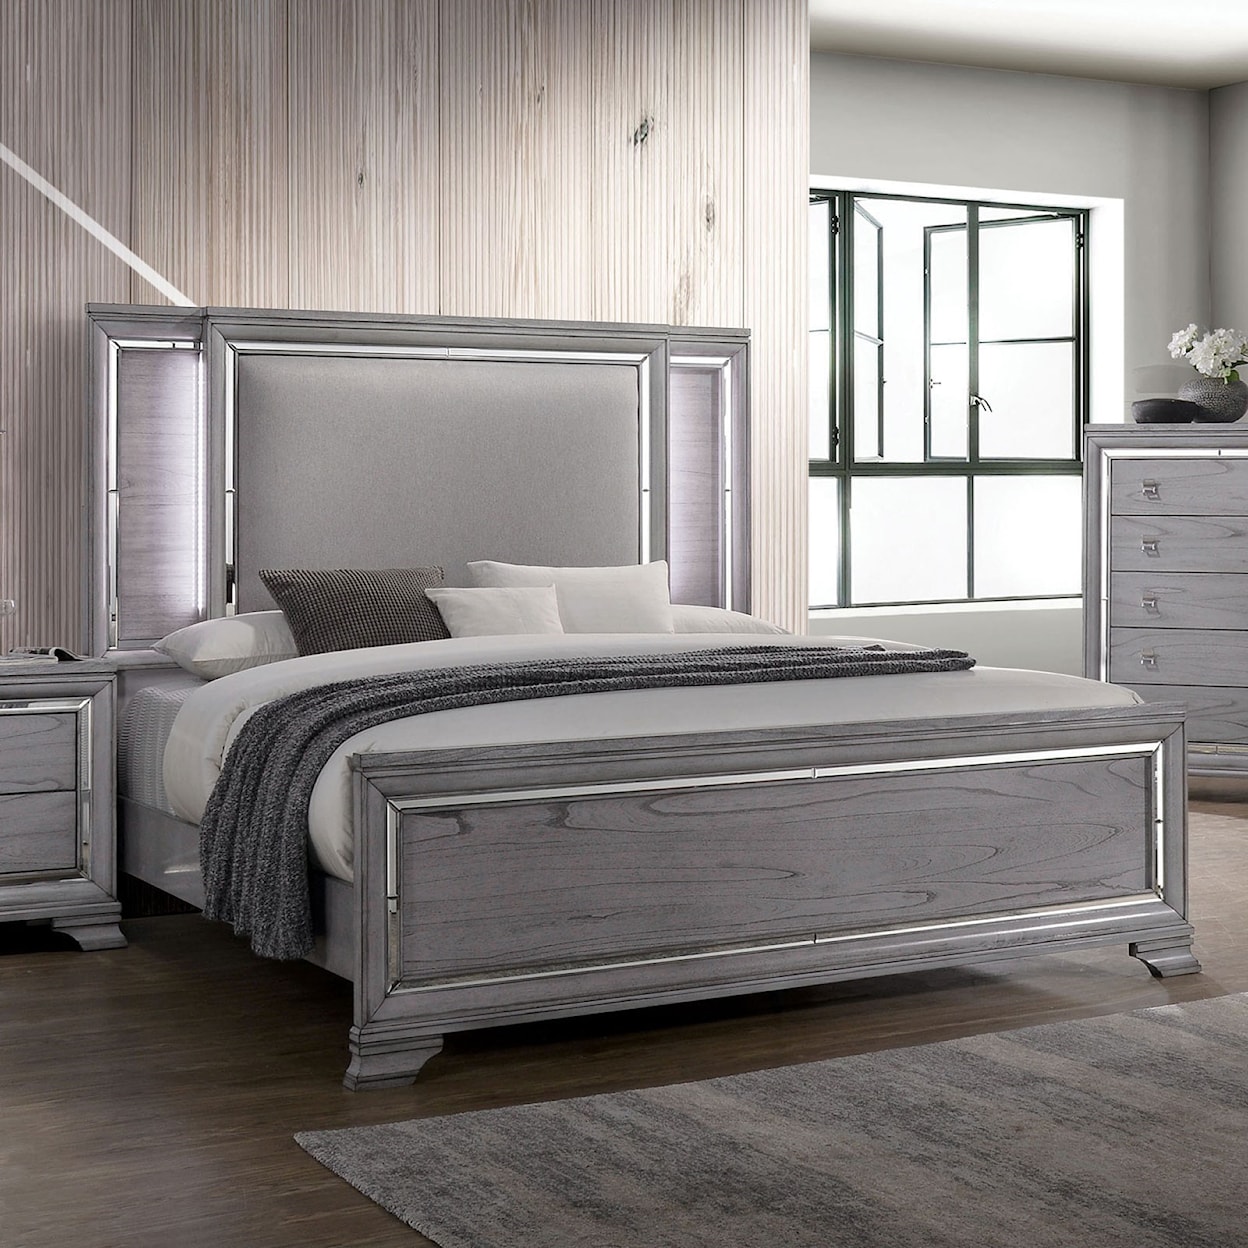 Furniture of America Alanis Cal King Upholstered Bed